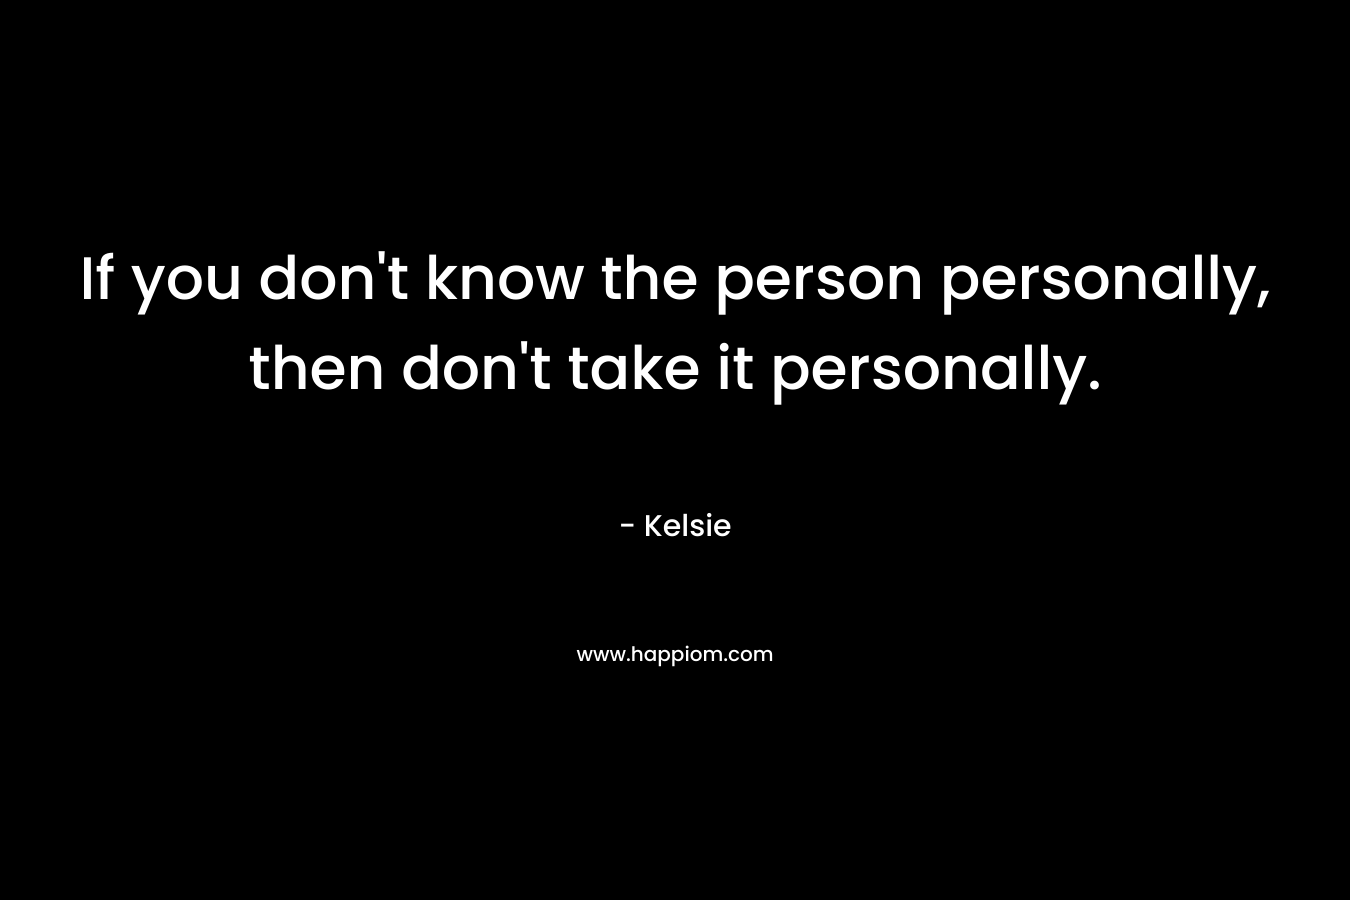 If you don't know the person personally, then don't take it personally.